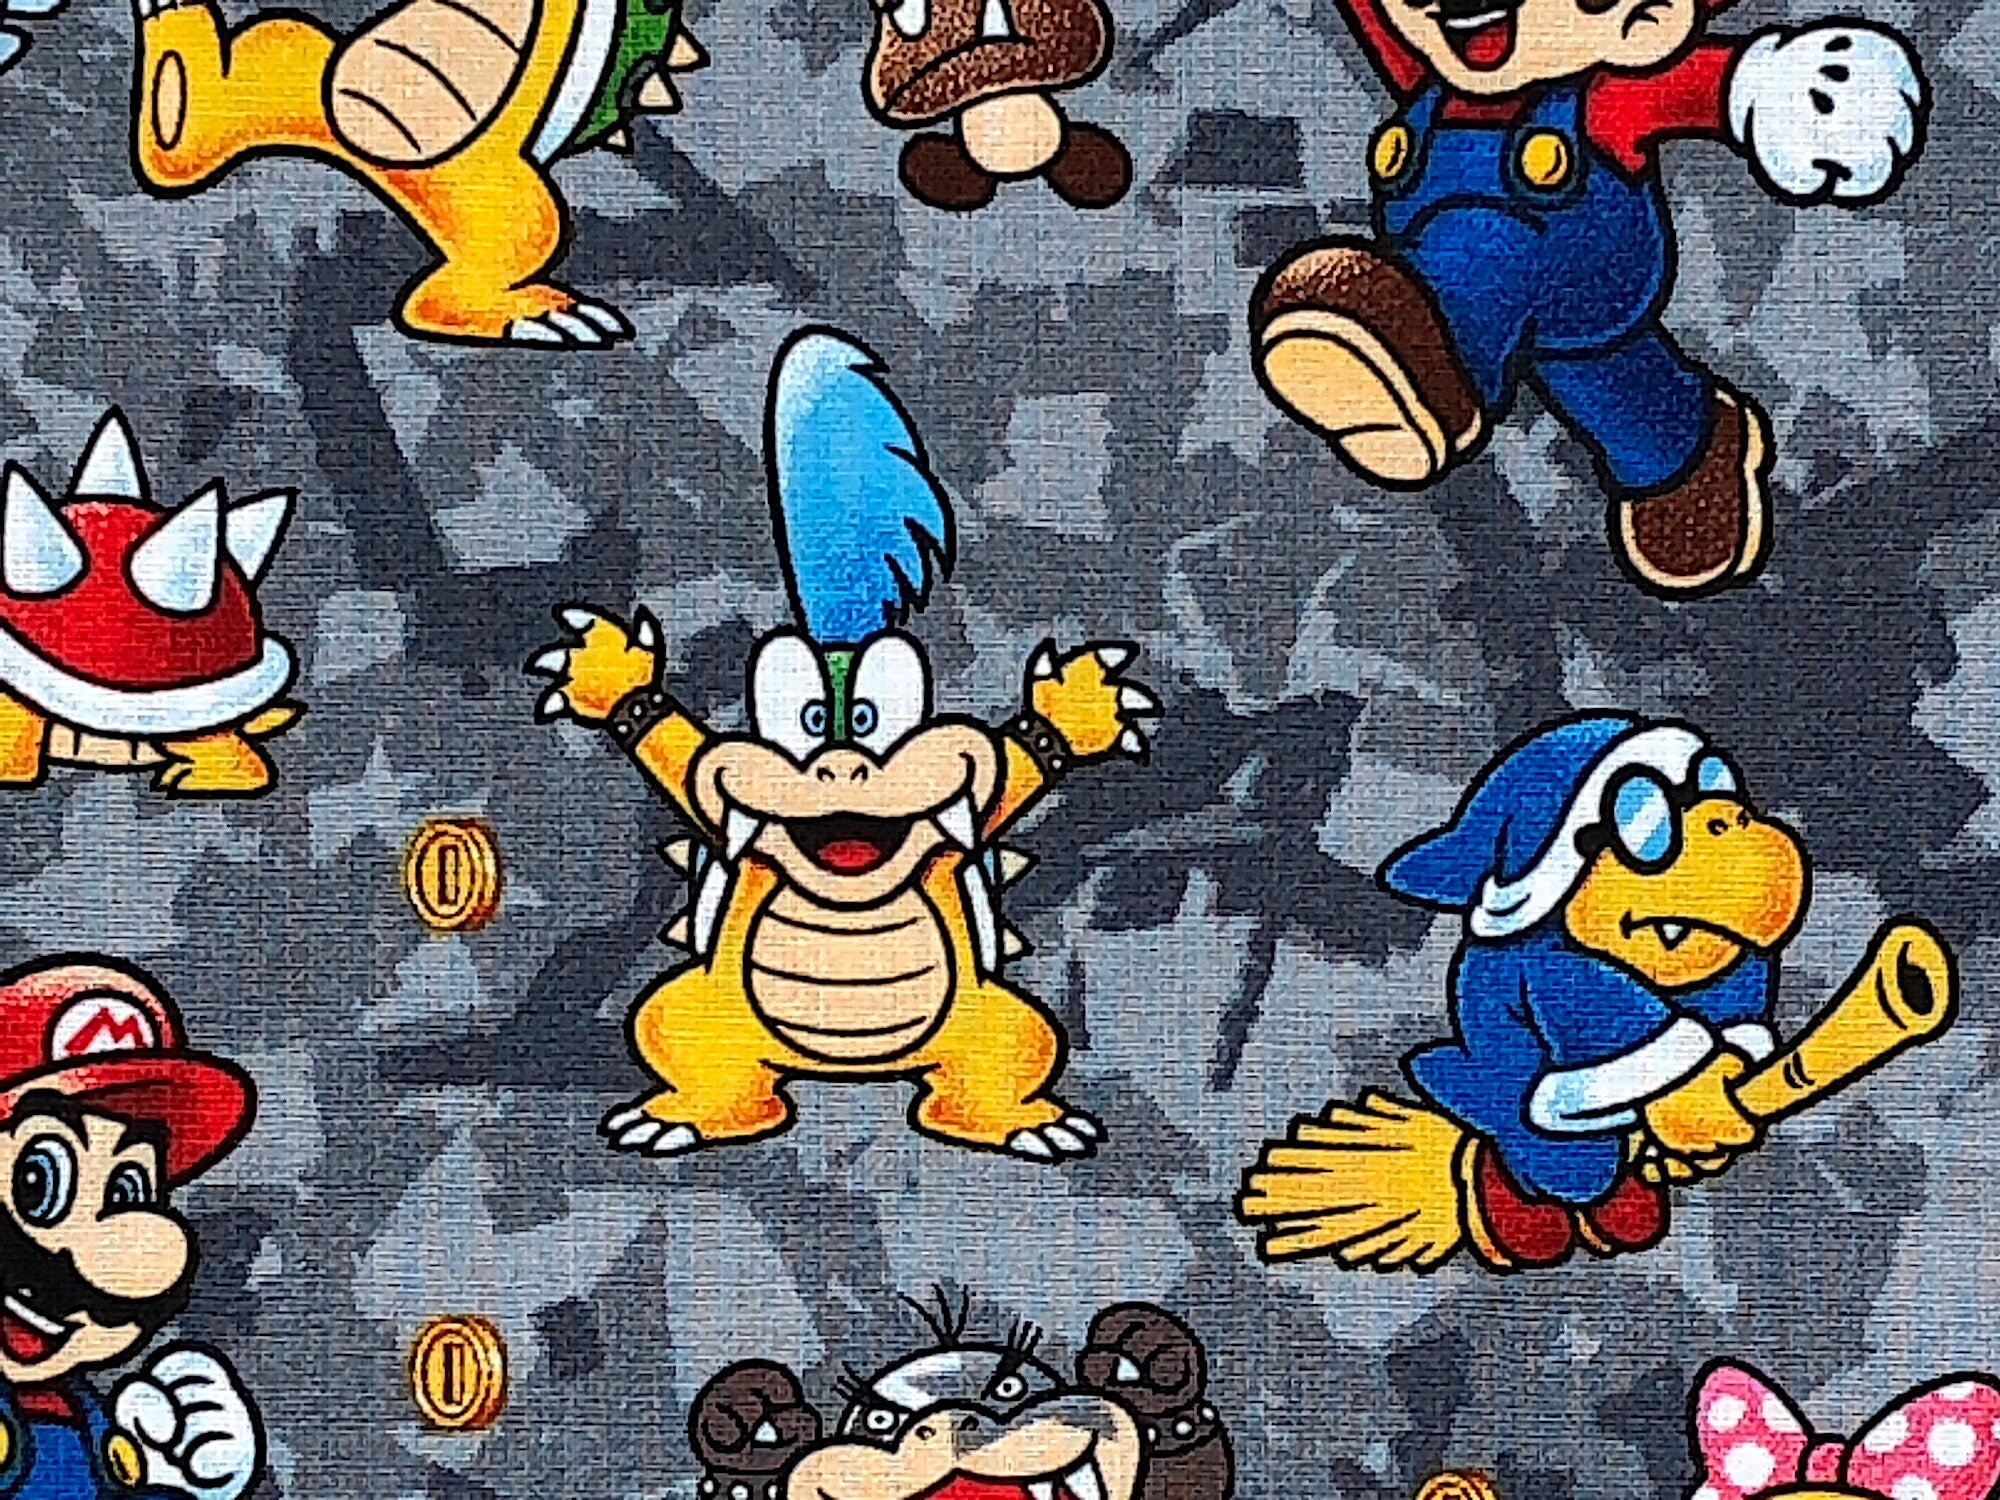 This gray fabric is covered with Super Mario characters such as Mario and Bowser.